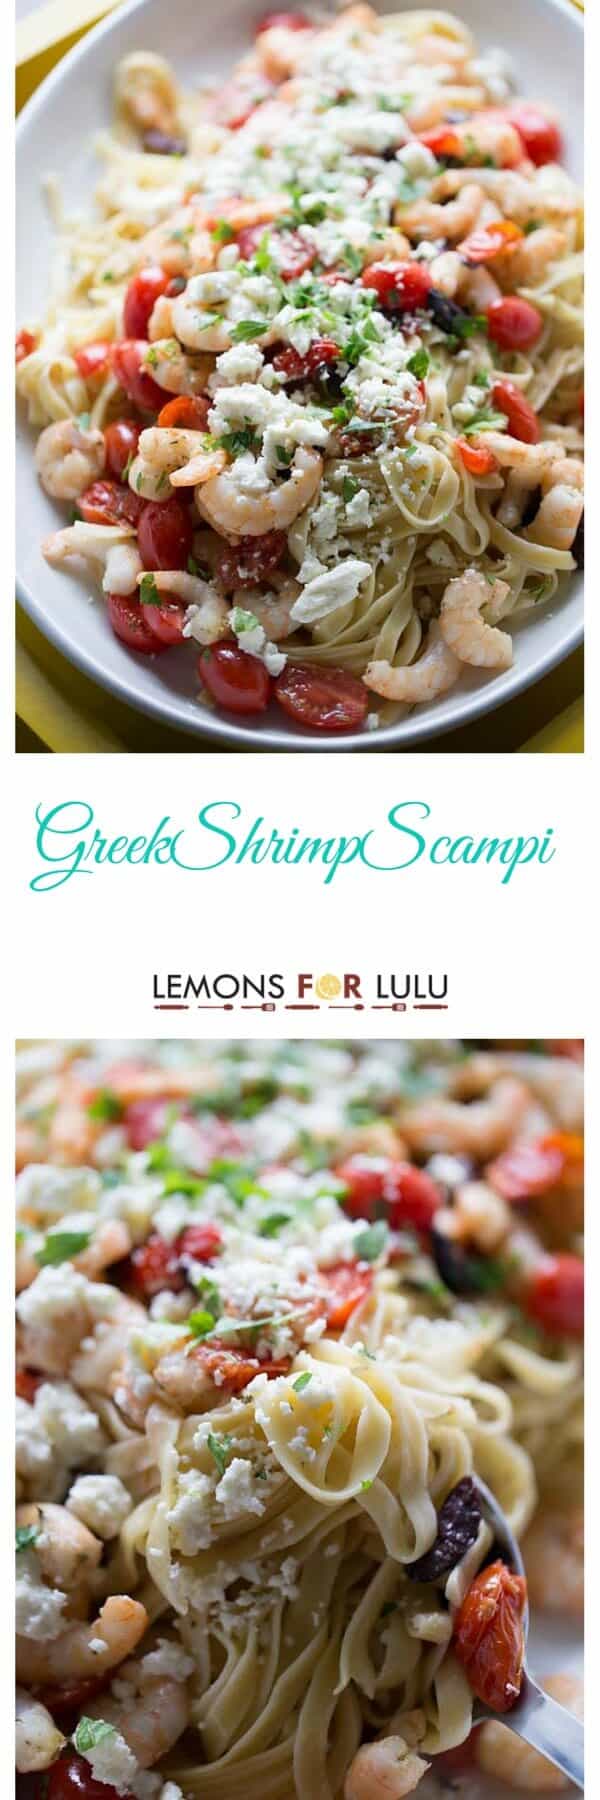 Greek Shrimp Scampi features pasta lightly tossed with seasoned shrinp, fresh cherry tomatoes, kalamata olives and feta cheese! A simple, no fuss recipe that is sure to please. lemonsforlulu.com